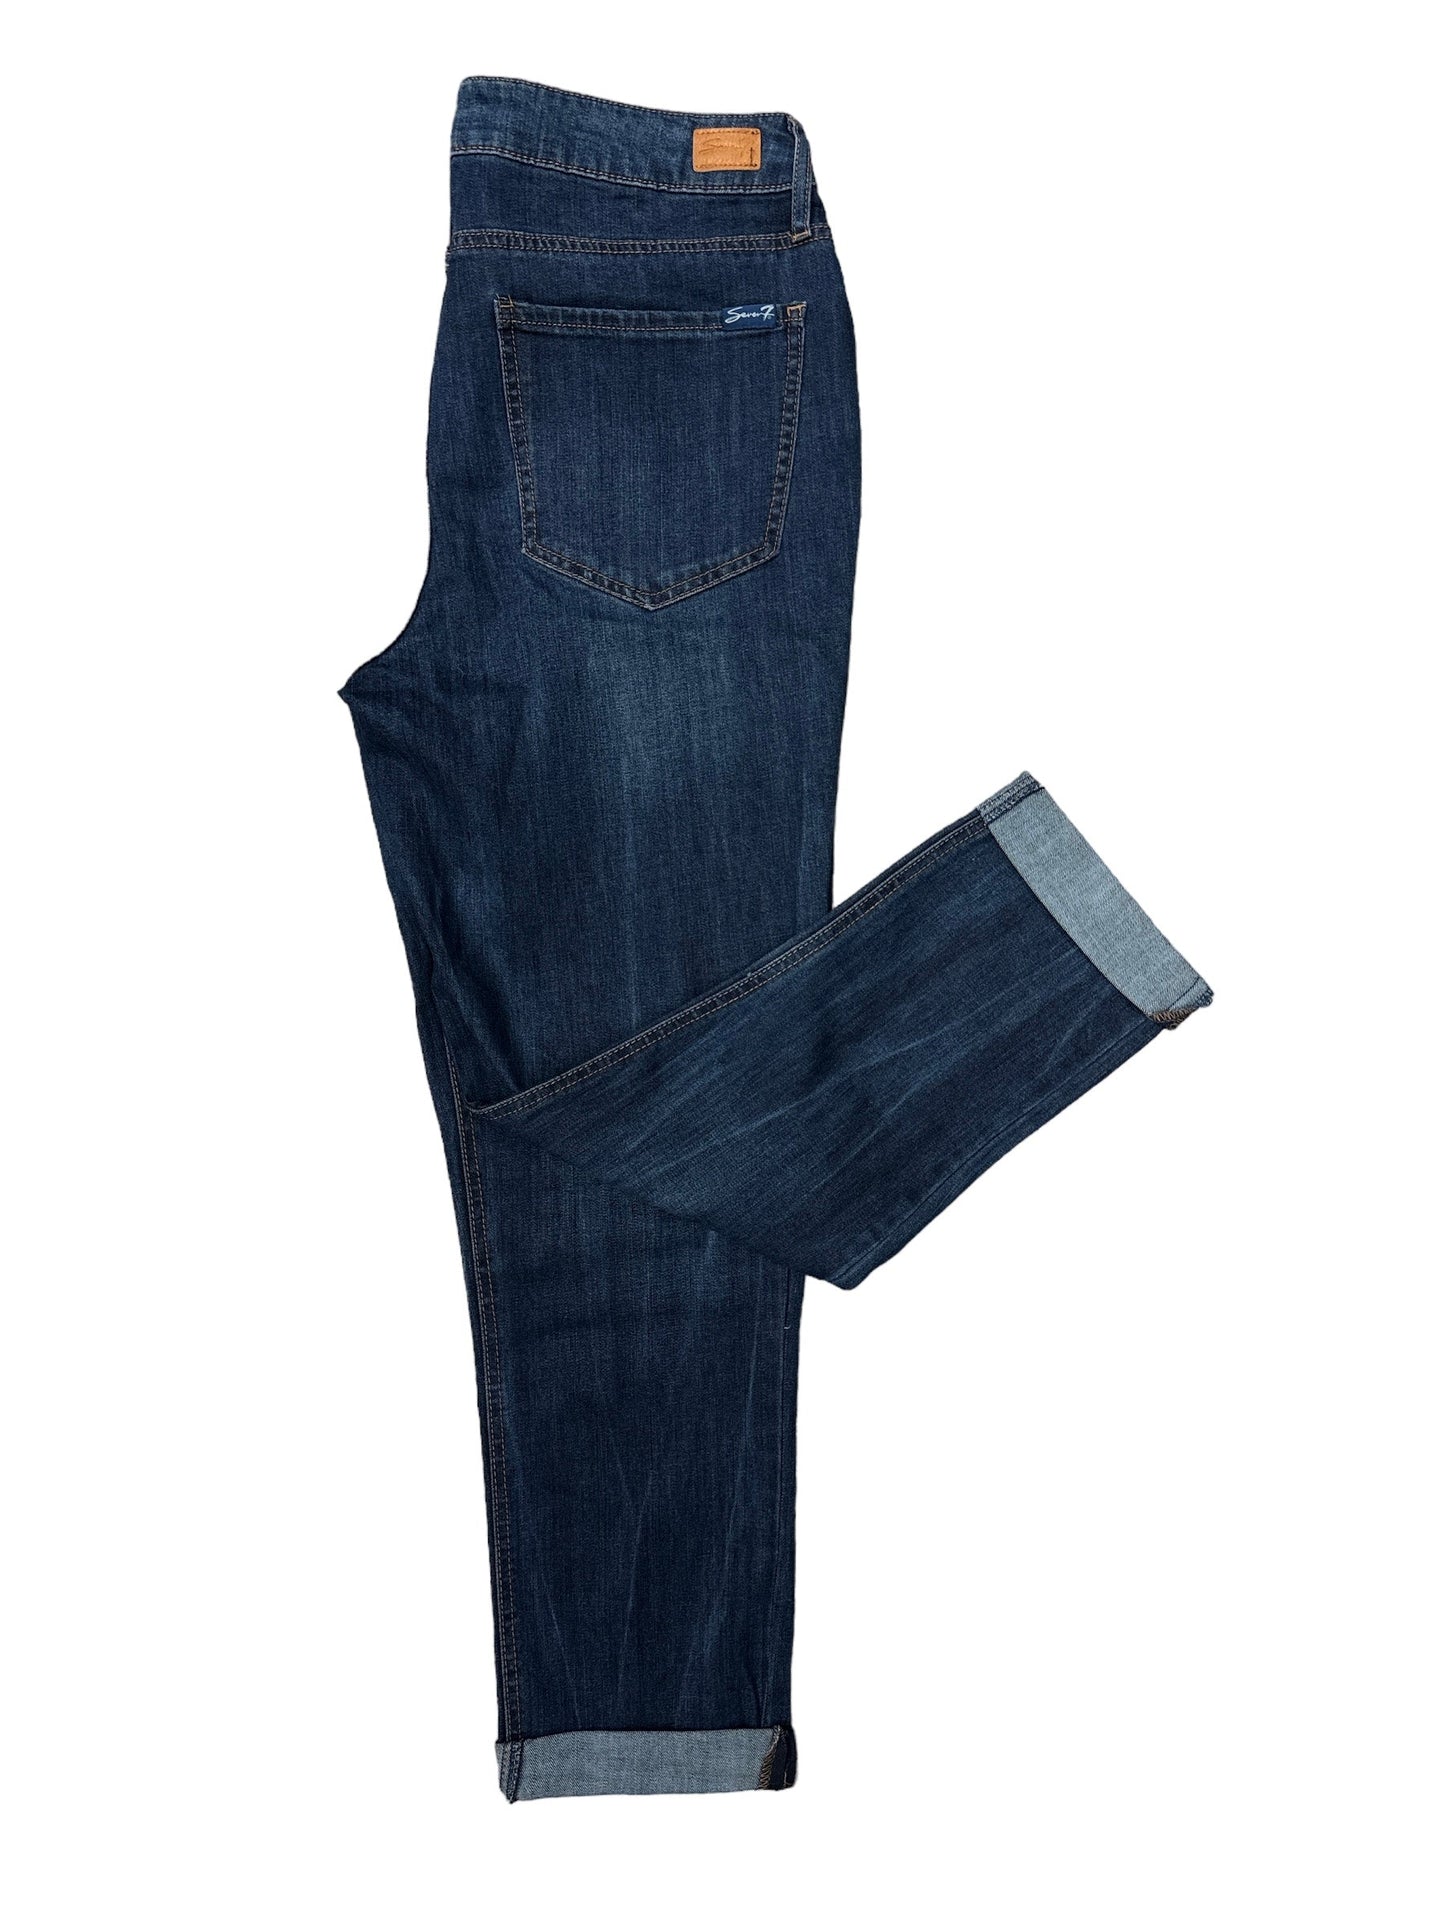 Jeans Designer By 7 For All Mankind  Size: 12